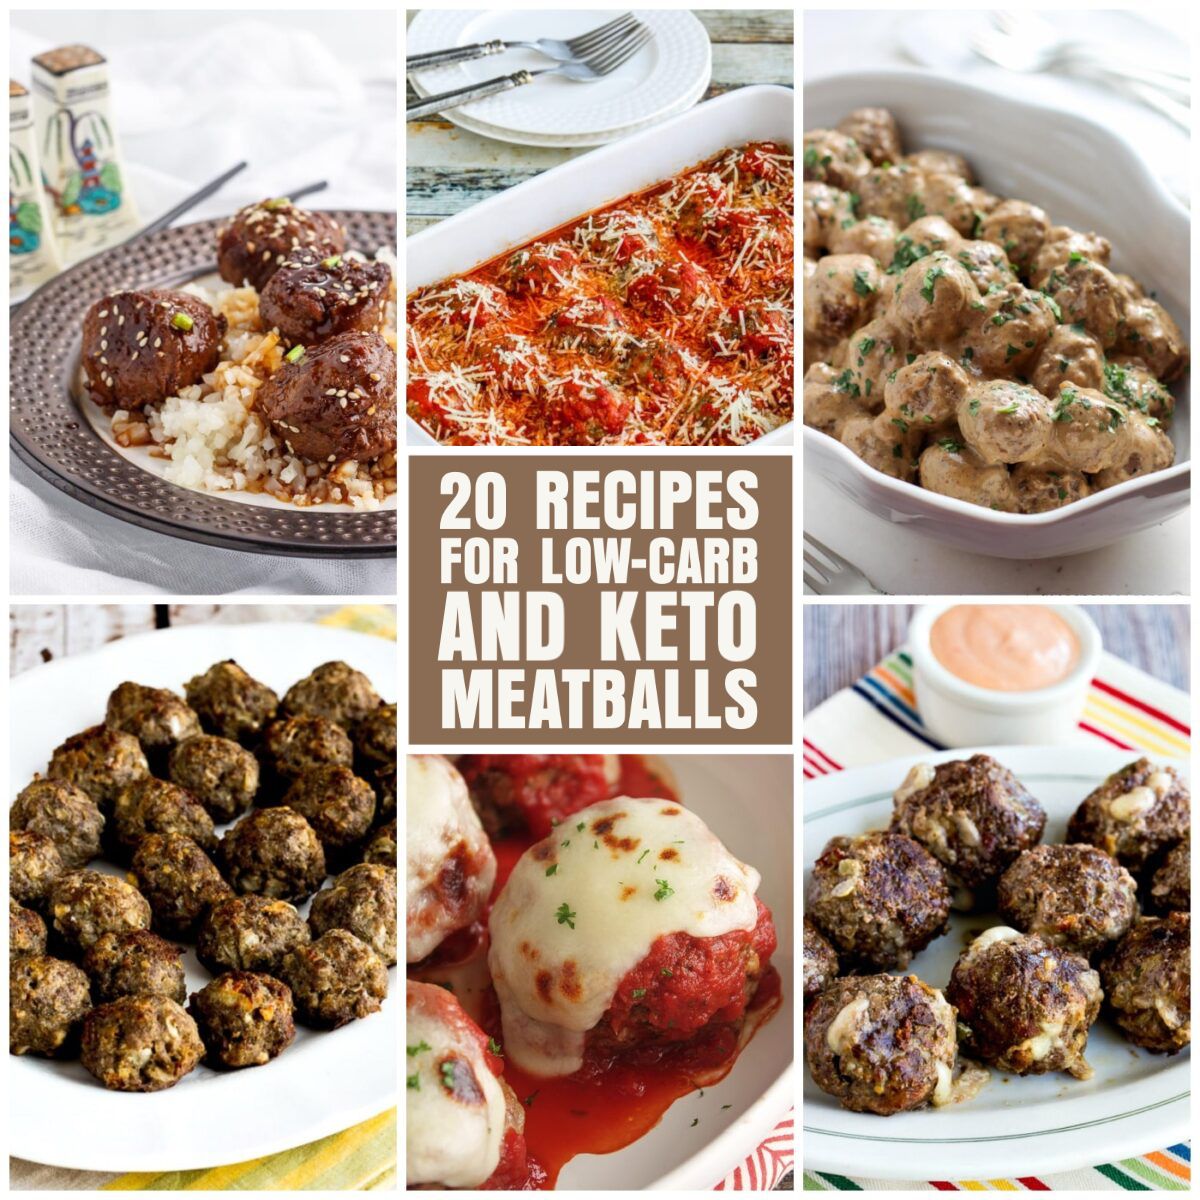 20 Recipes for Low-Carb and Keto Meatballs collage of featured recipes with text overlay.